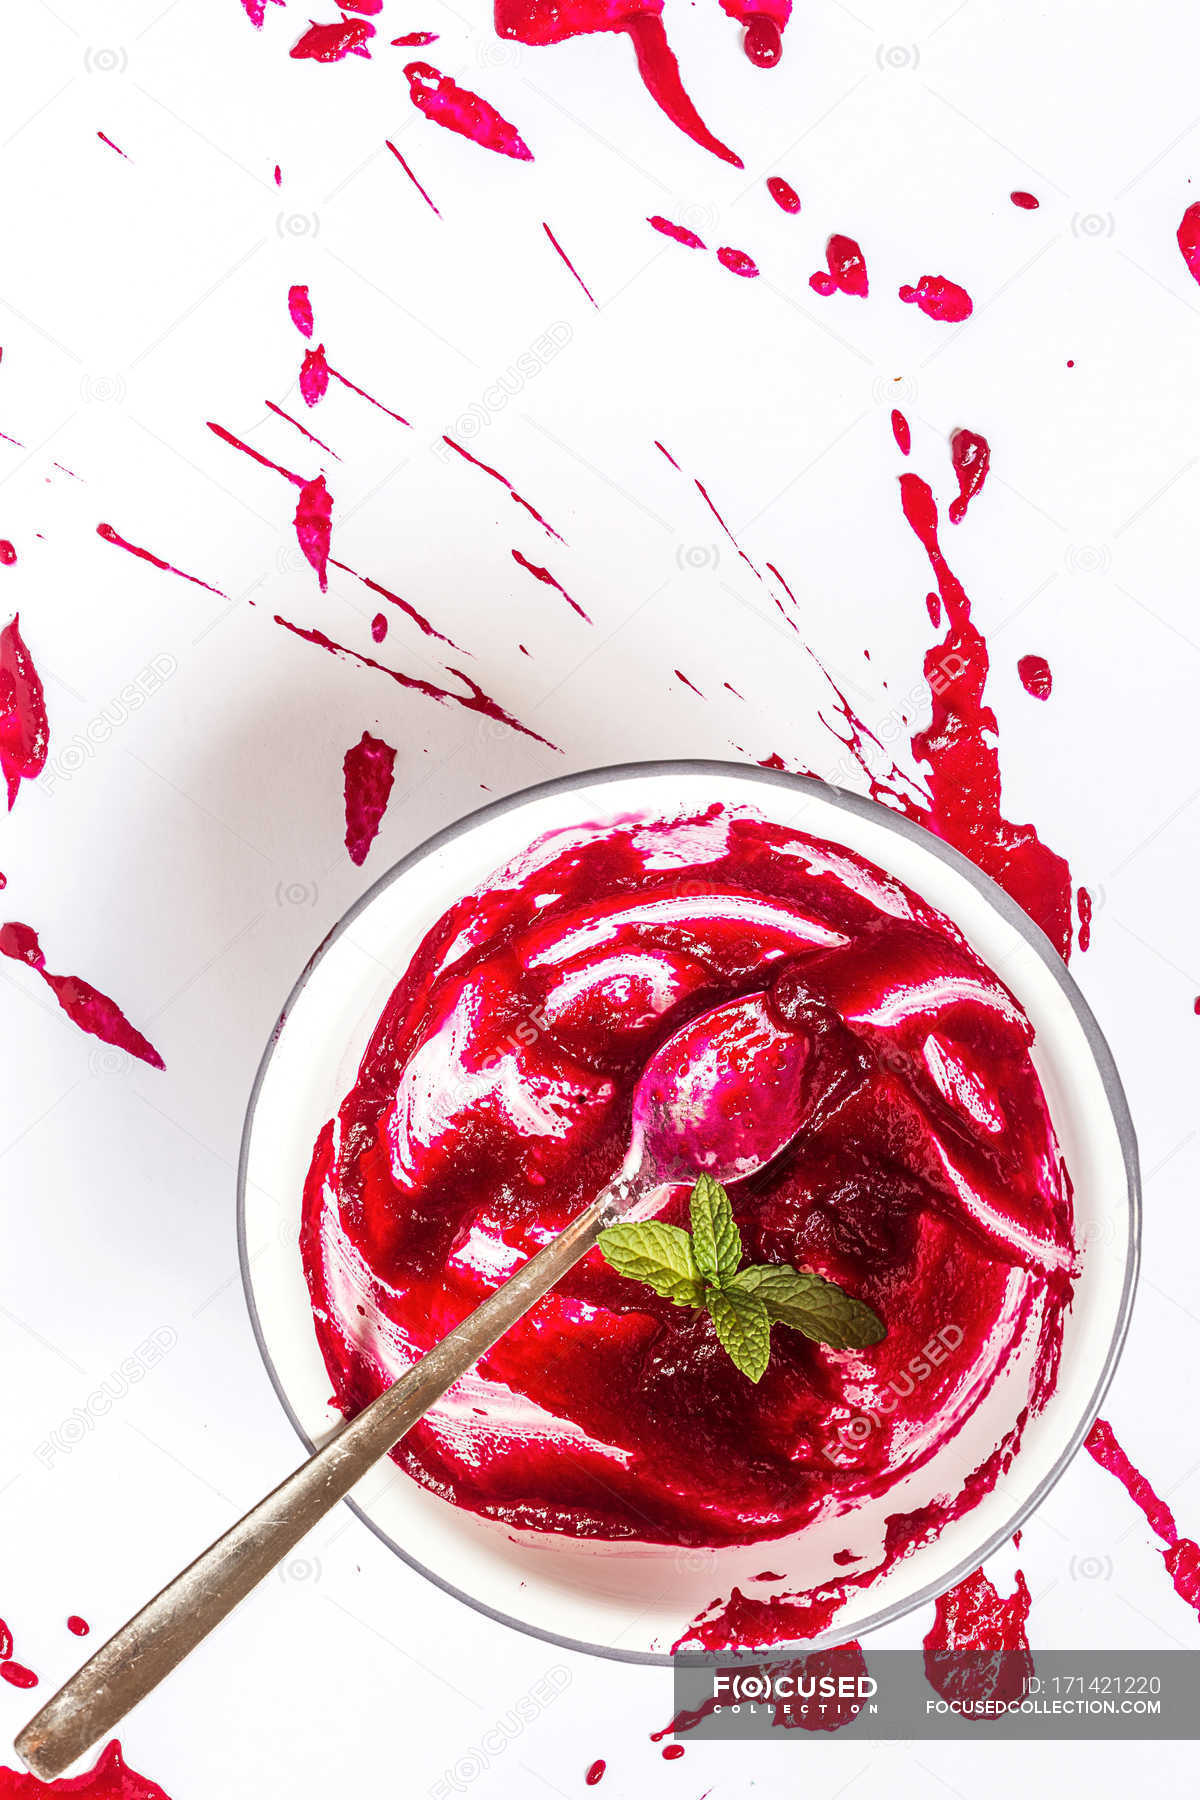 Beet soup leftovers — healthy, white - Stock Photo | #171421220